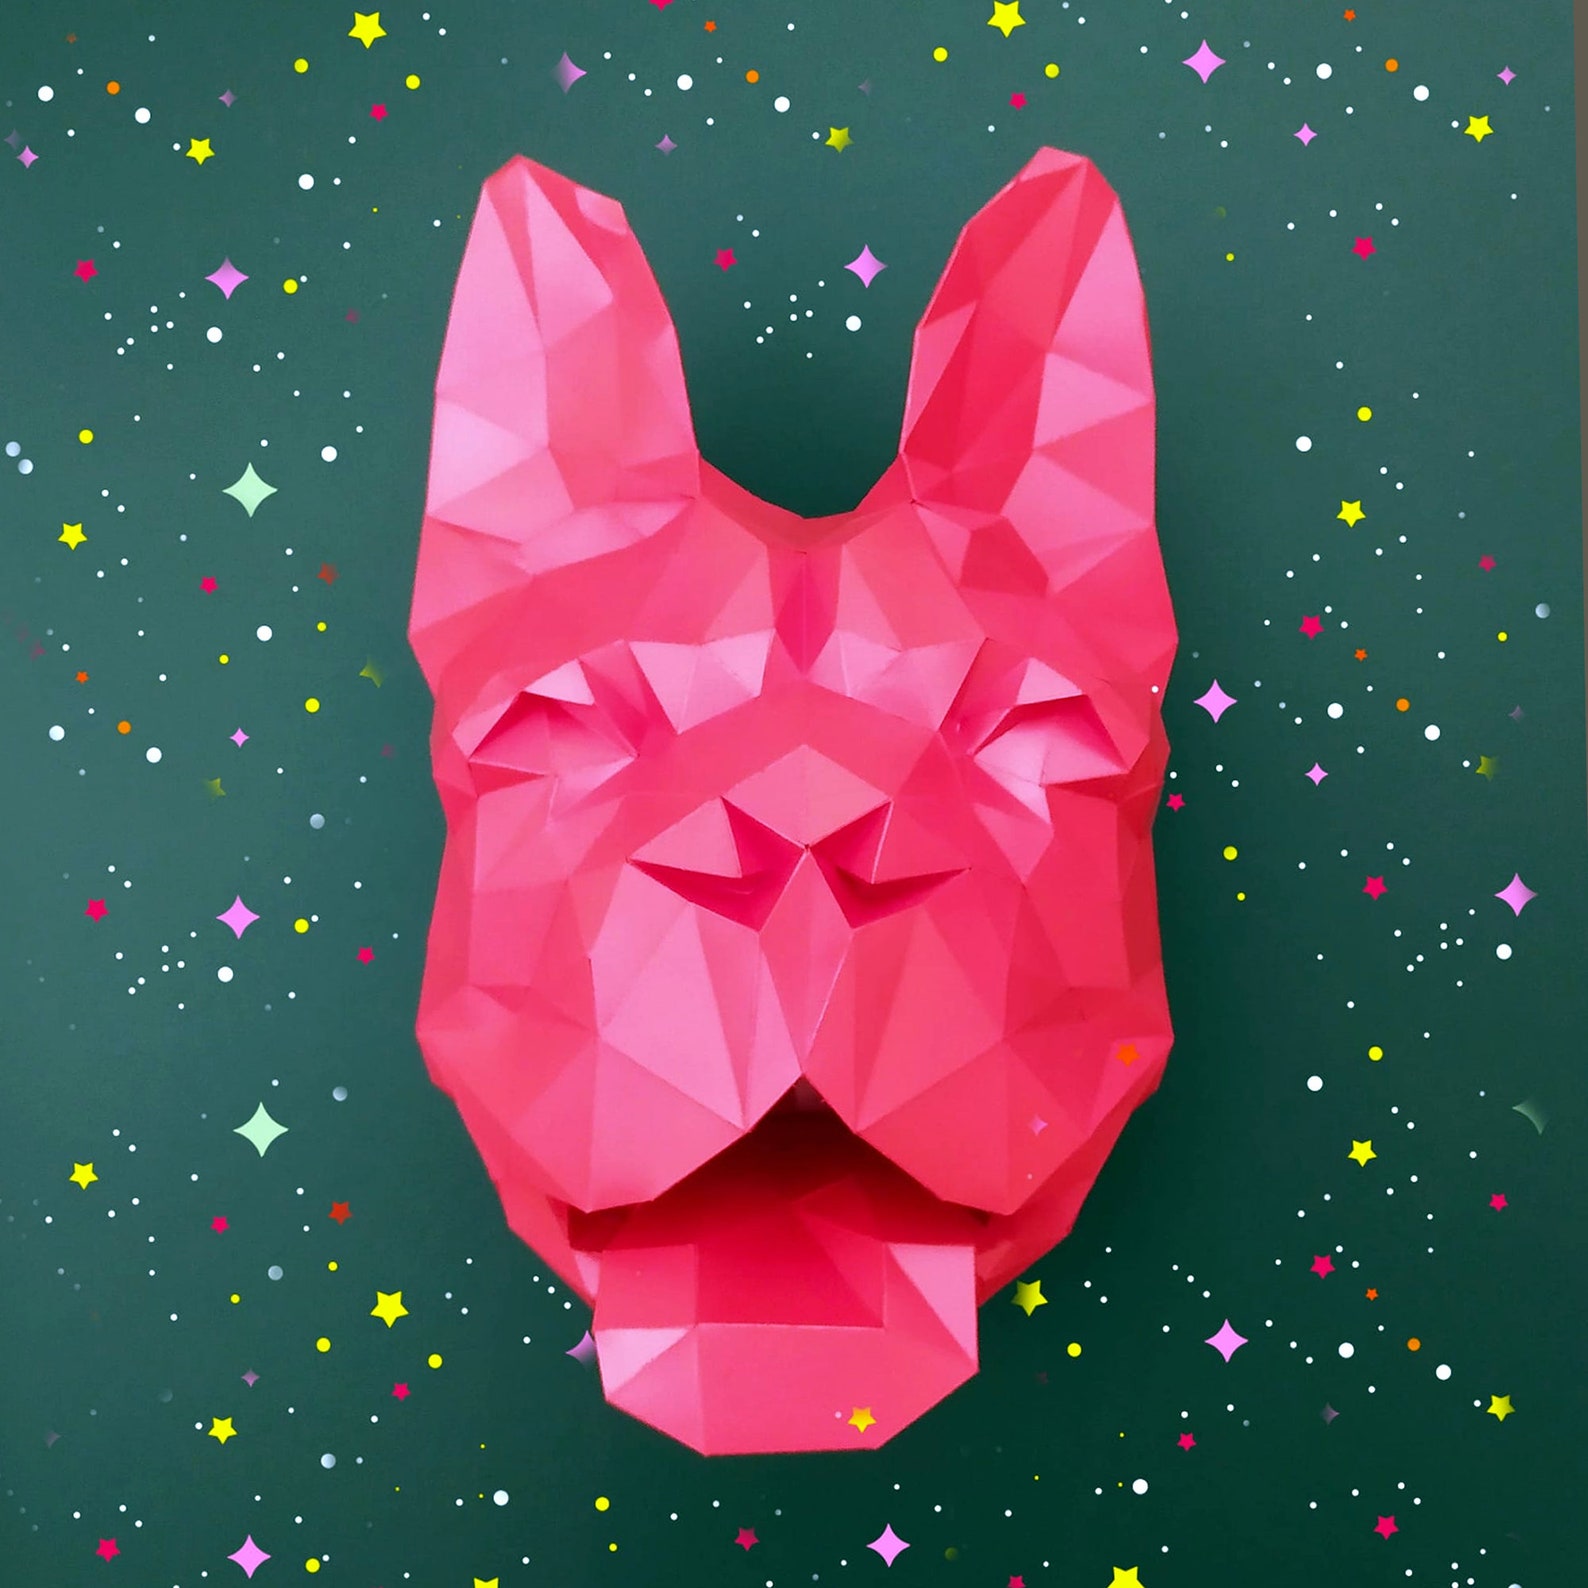 French Bulldog Papercraft Sculpture Printable 3D Puzzle - Etsy